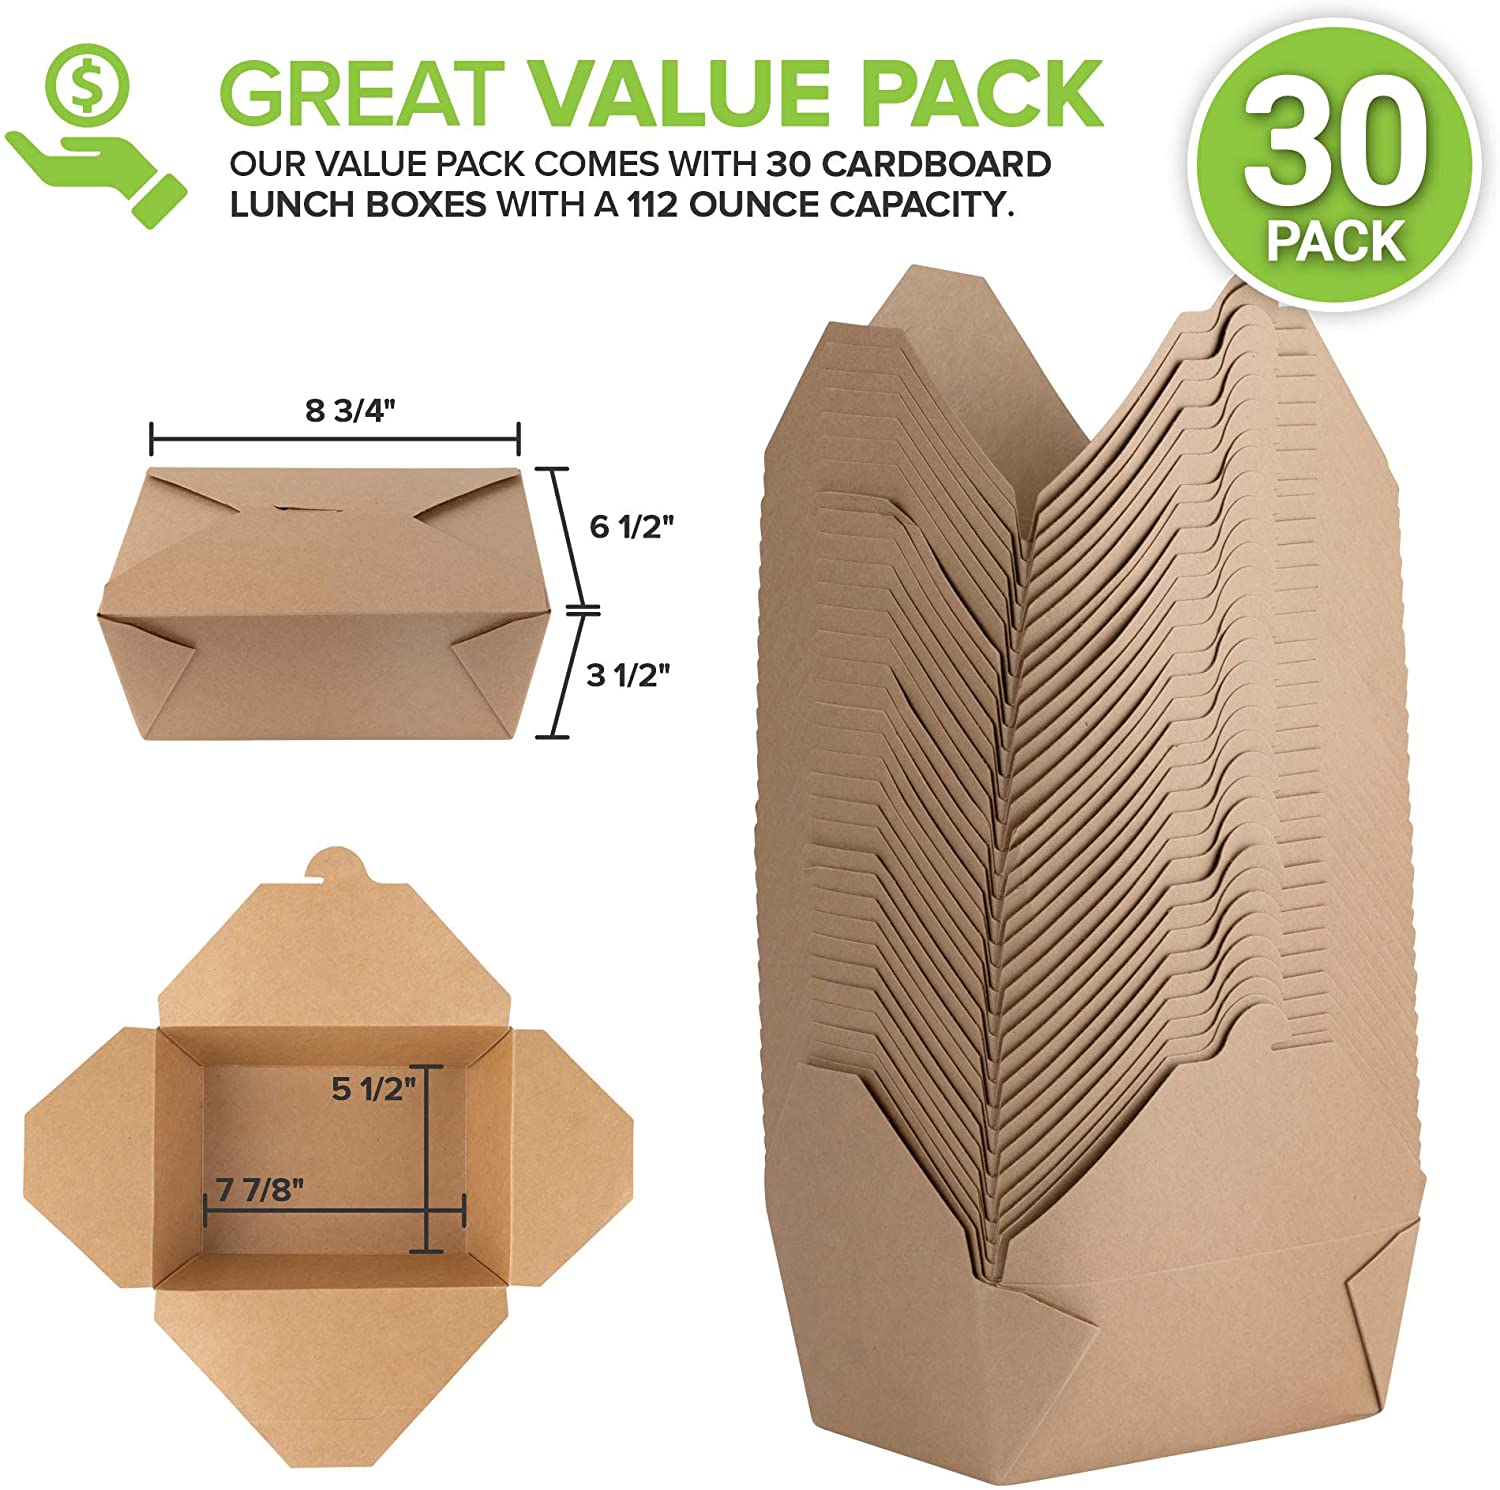 [450 Pack] 30 oz Paper Take Out Containers 5 x 4.2 x 2.5 - White Lunch  Meal Food Boxes #1, Disposable Storage To Go Packaging, Microwave Safe,  Leak